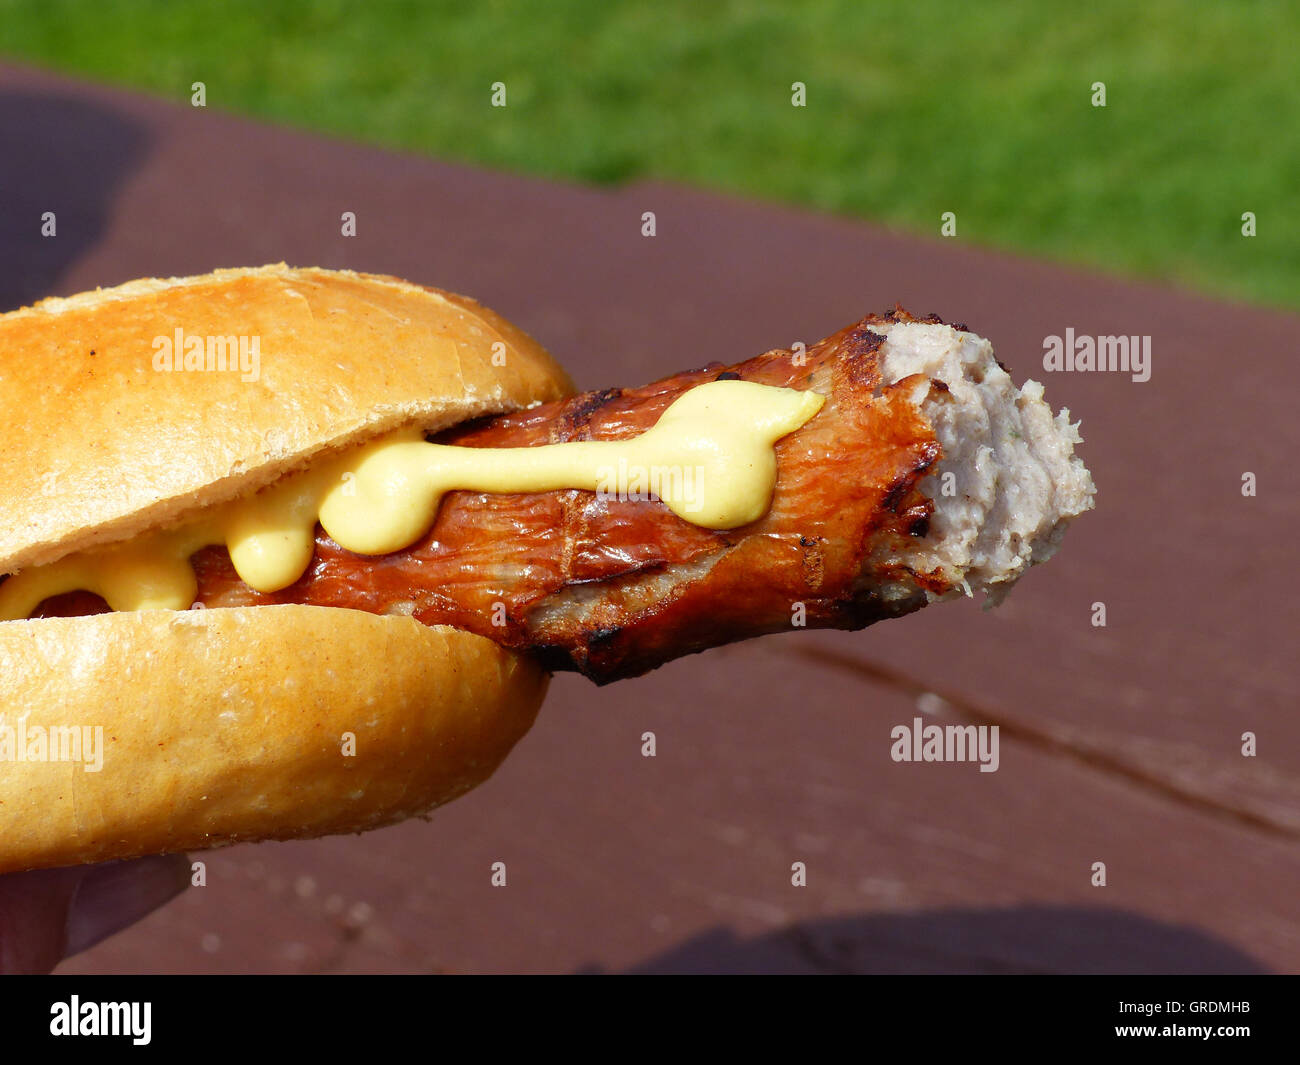 Bitten Into A Grilled Sausage With Mustard Stock Photo